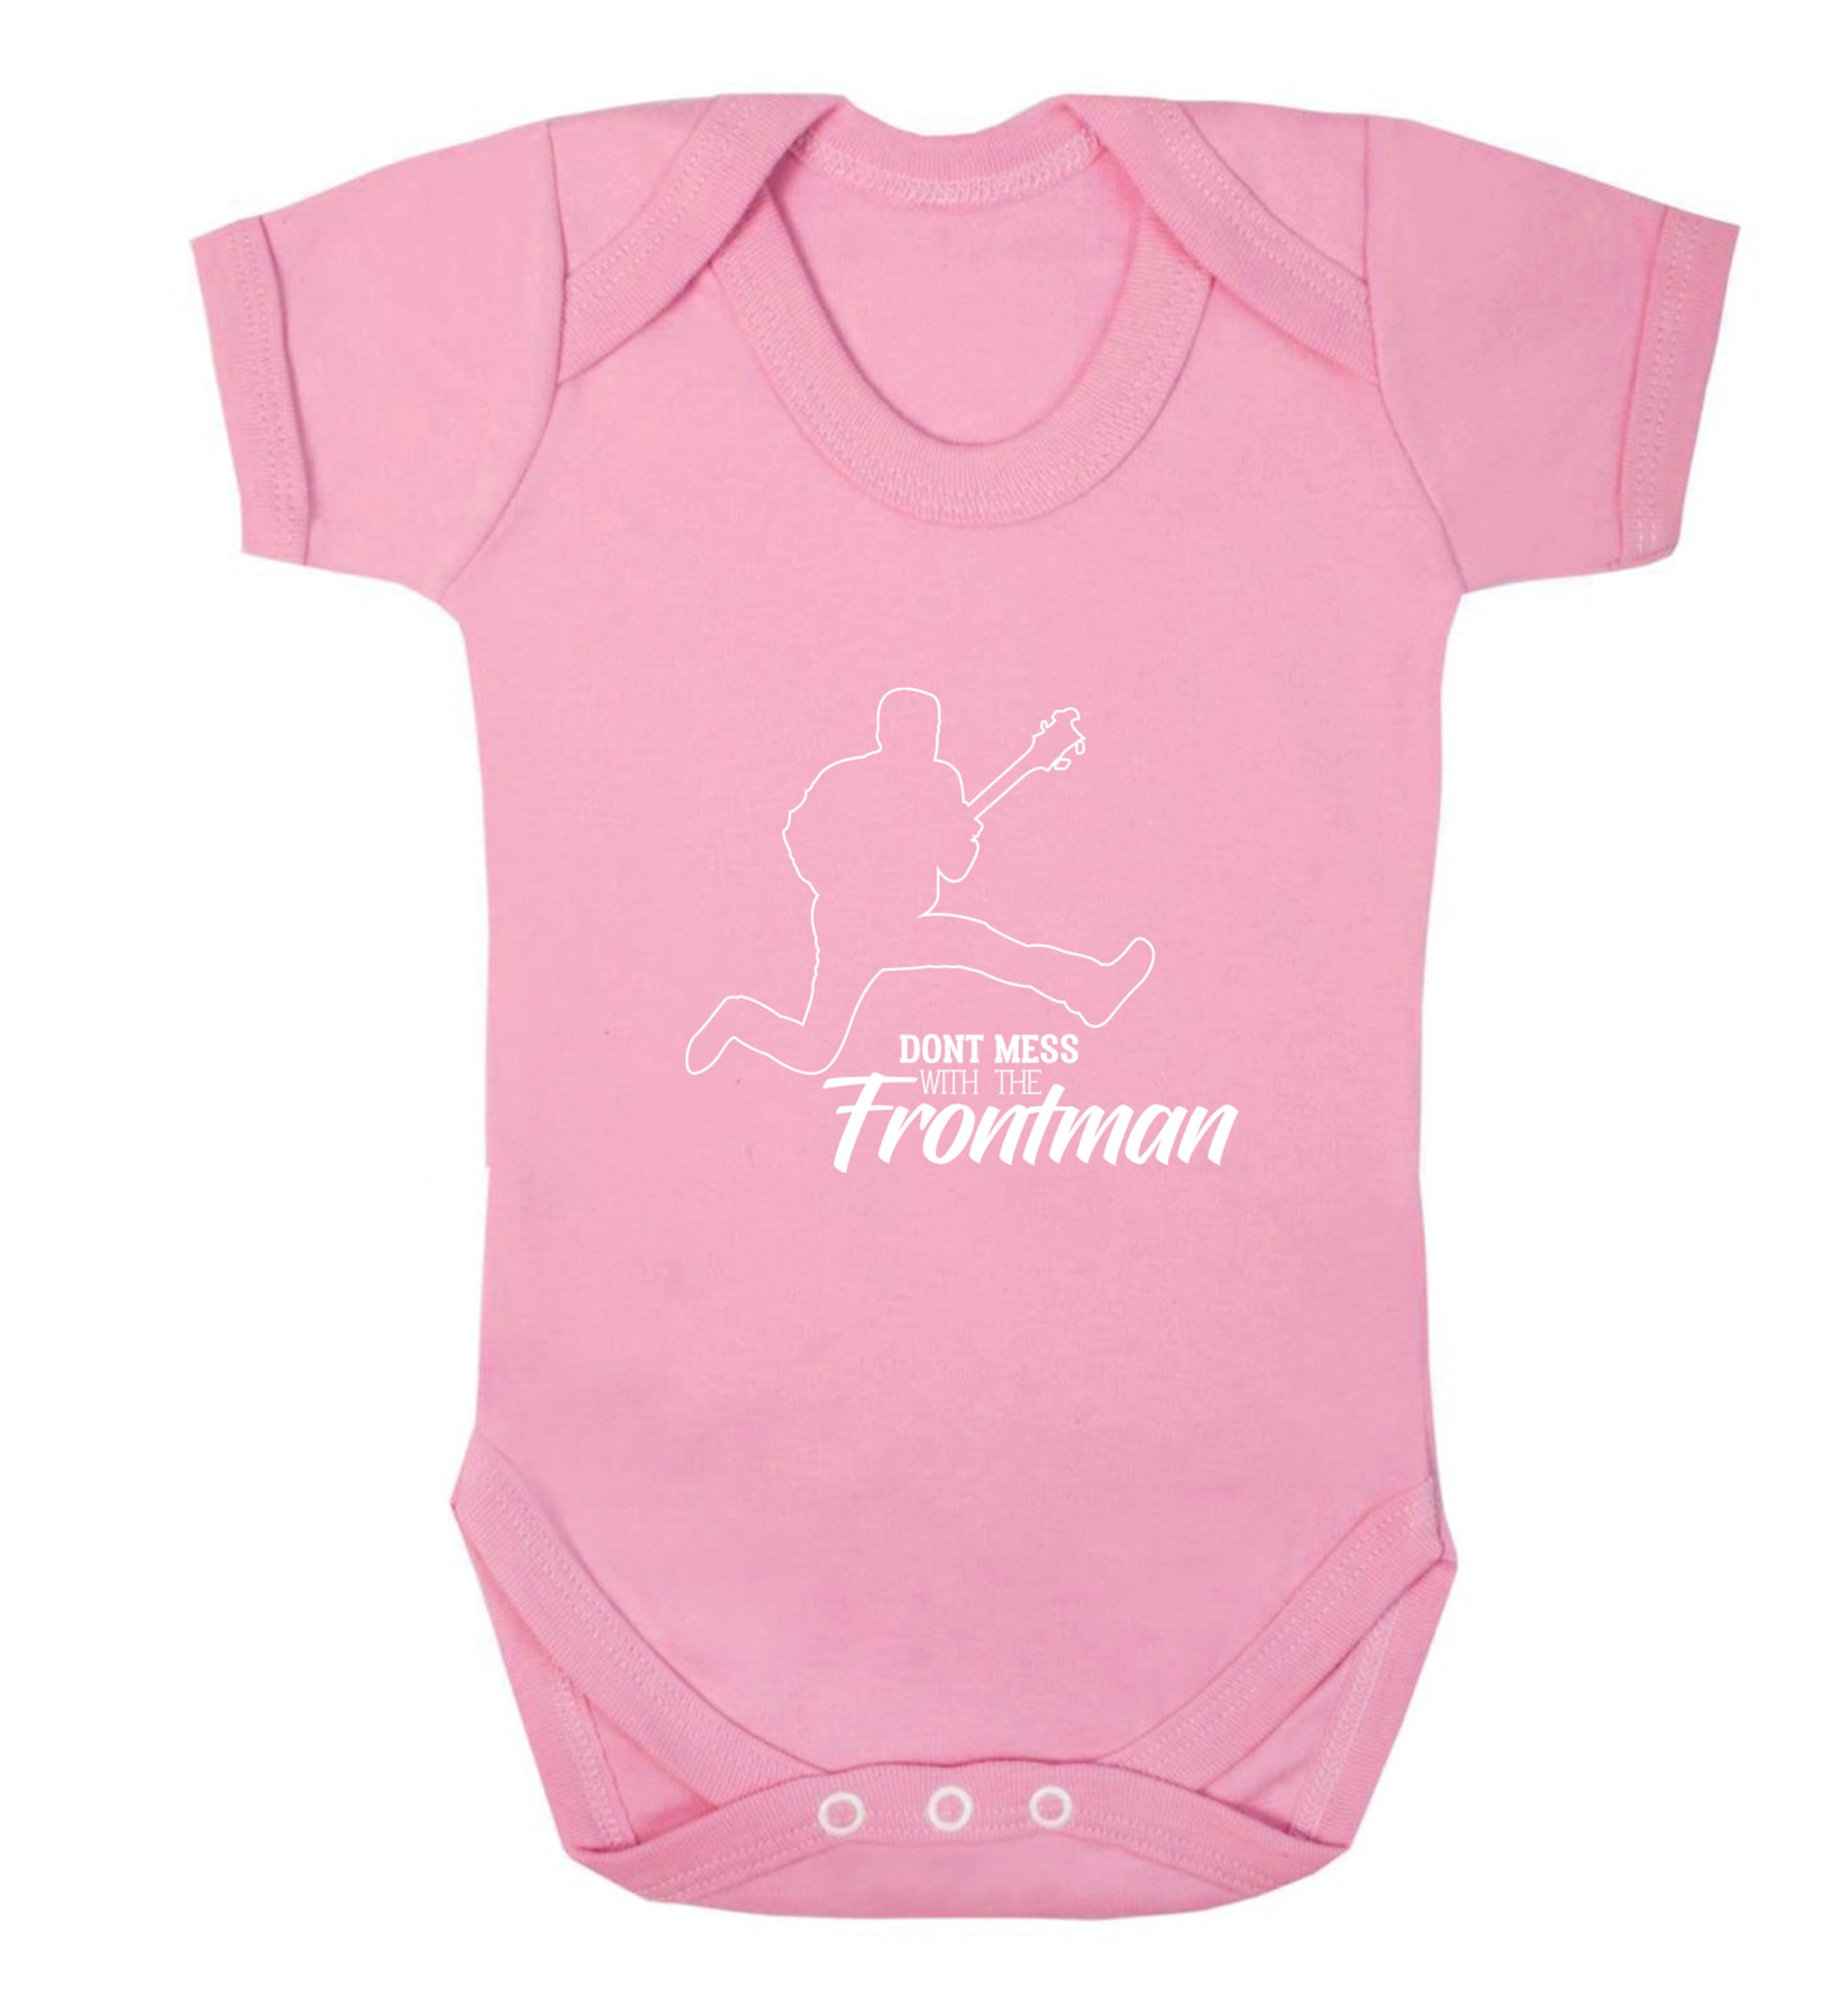 Don't mess with the frontman Baby Vest pale pink 18-24 months